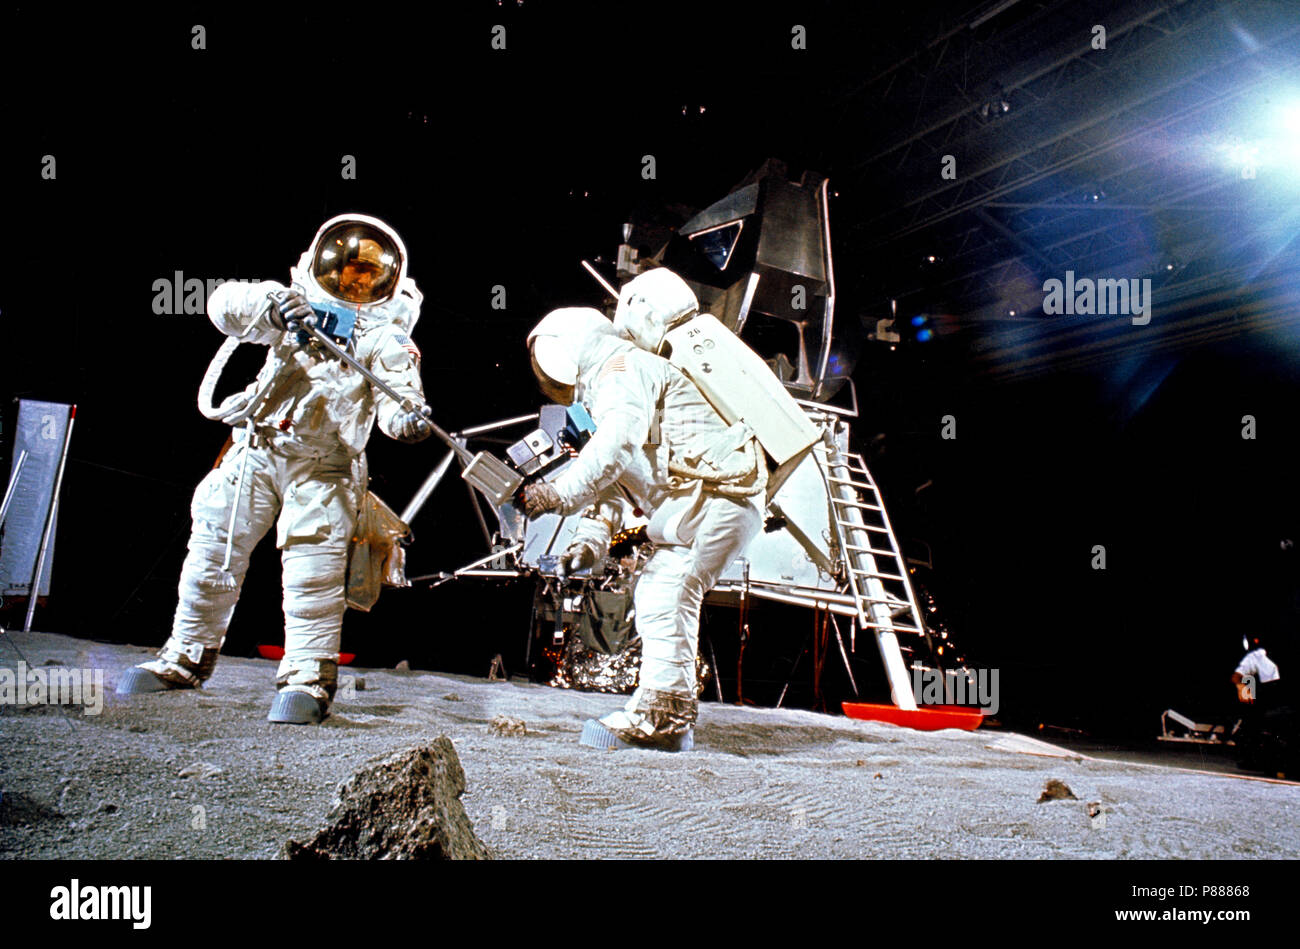 Two members of the Apollo 11 lunar landing mission participate in a simulation of deploying and using lunar tools, on the surface of the moon, during a training exercise Stock Photo